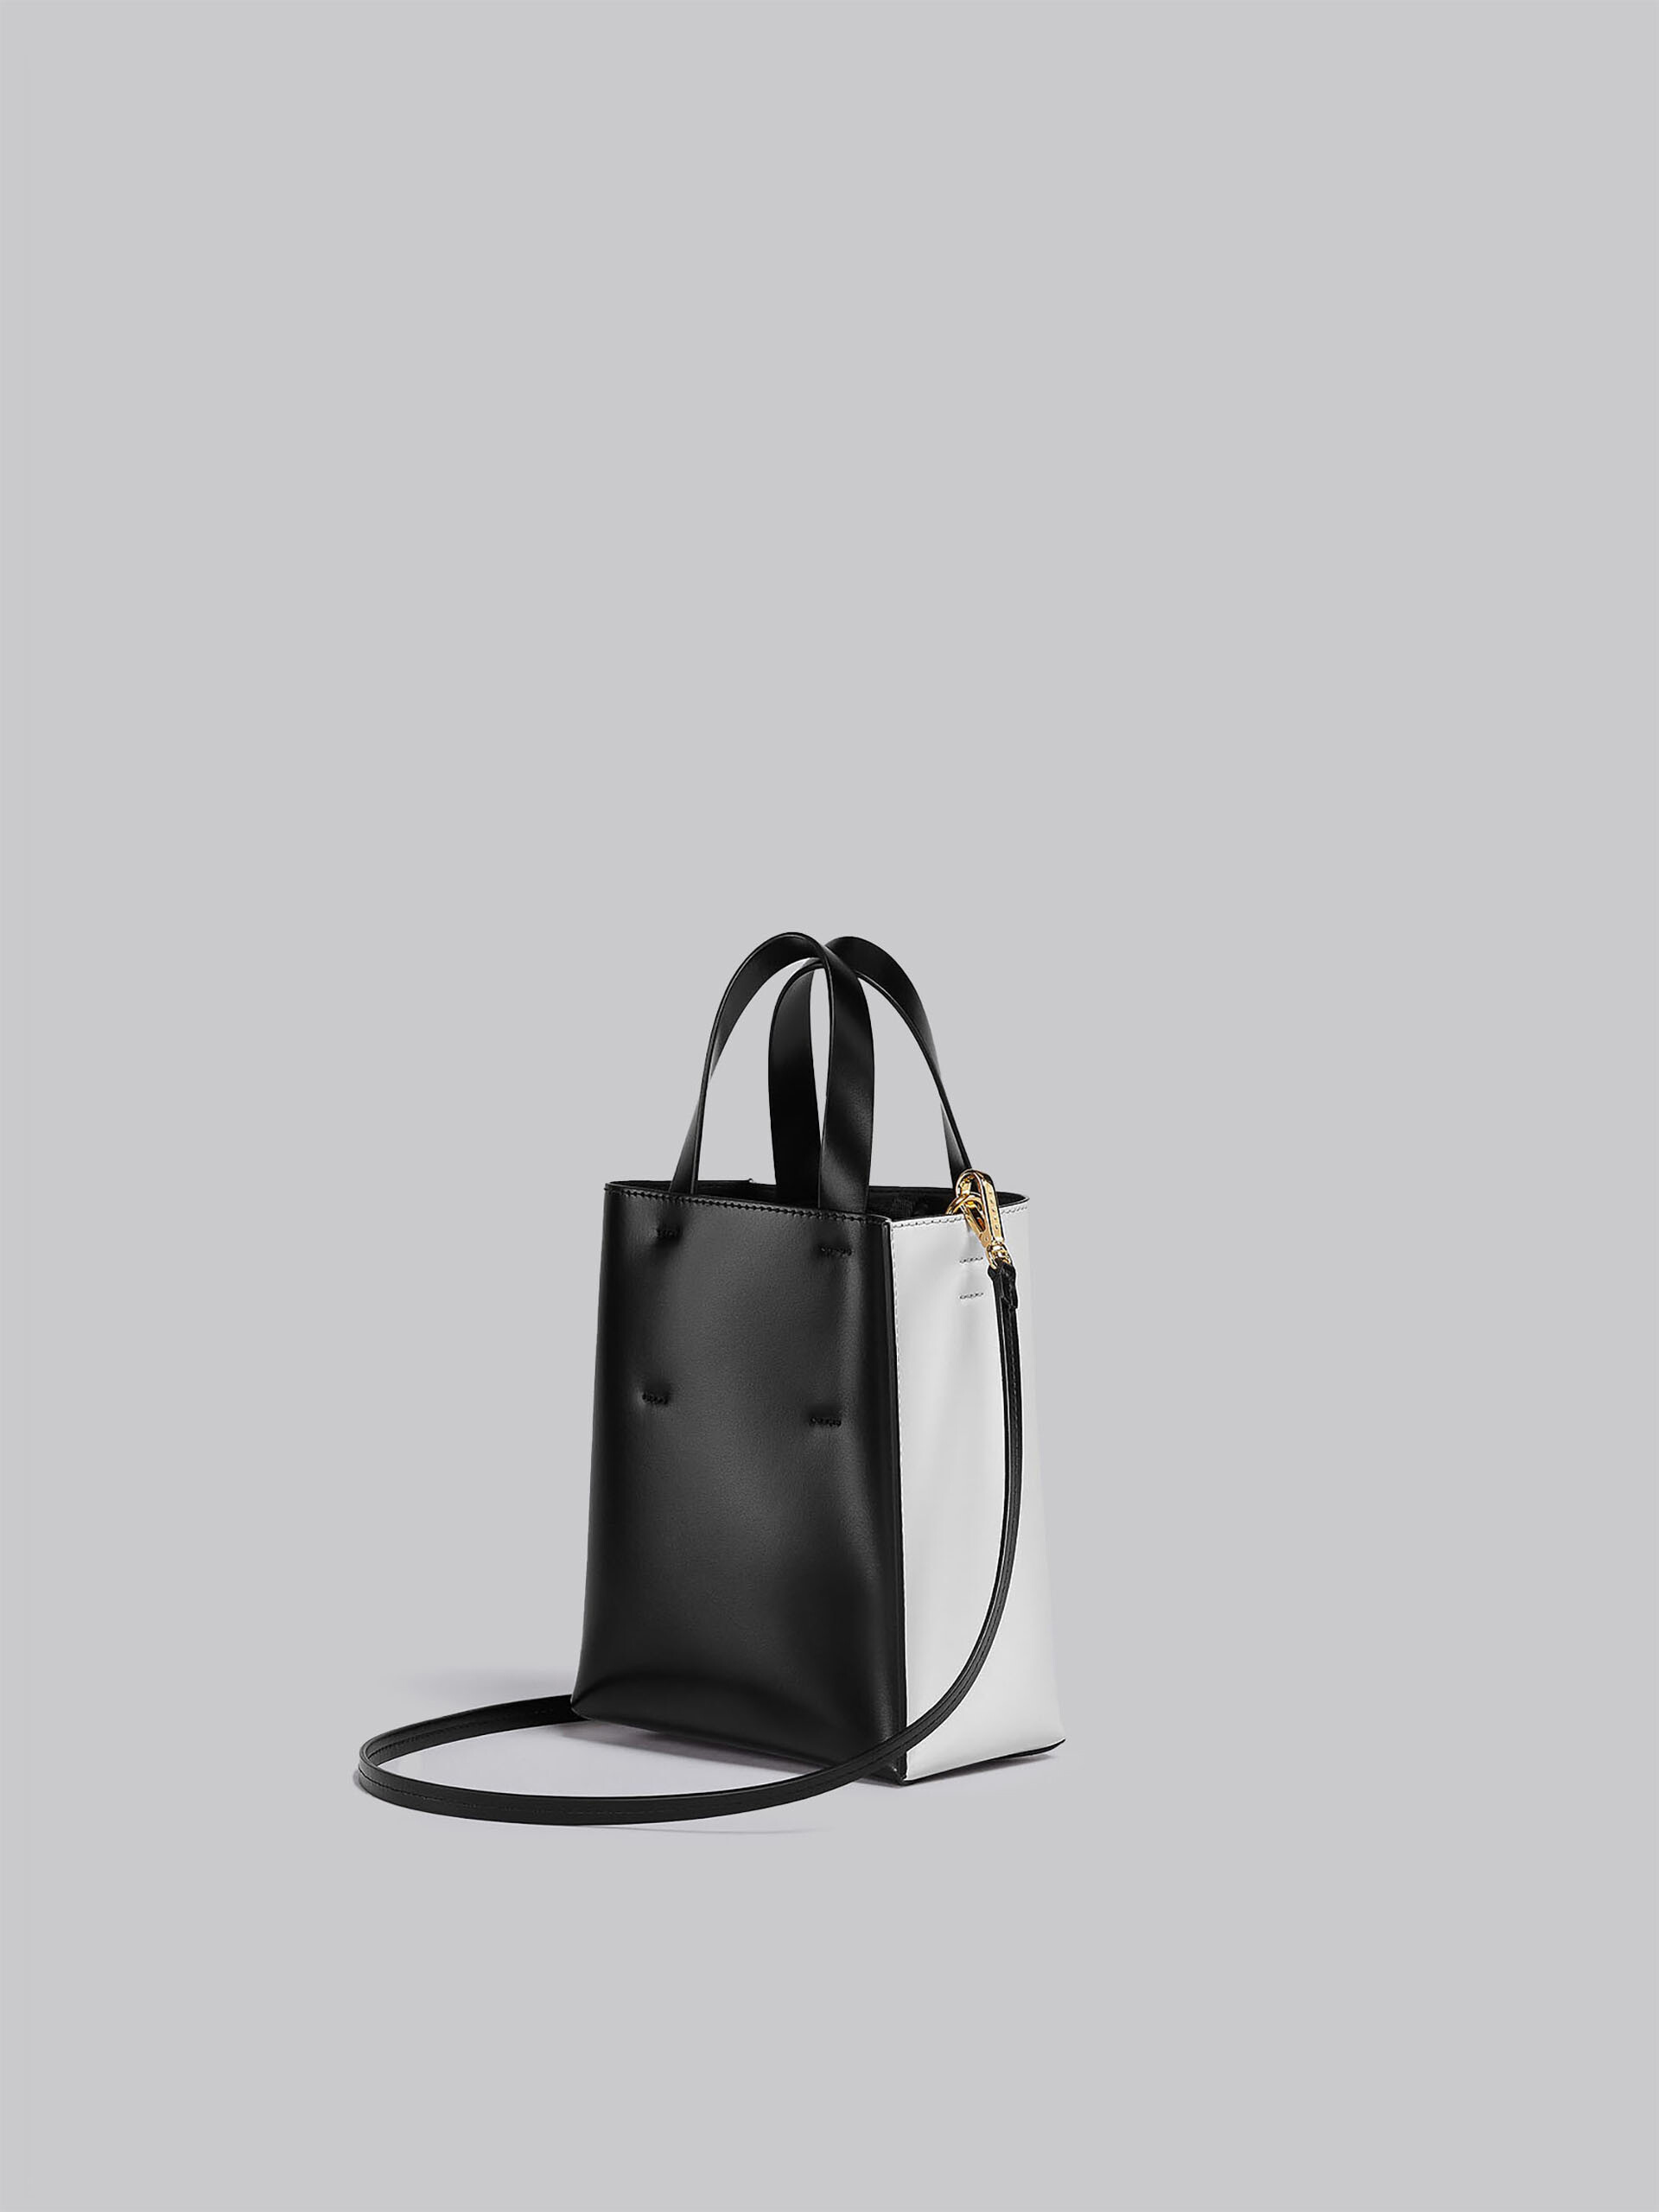 Marni Women's Museum Bag in Leather with Shoulder Strap - White - Top Handle Bags